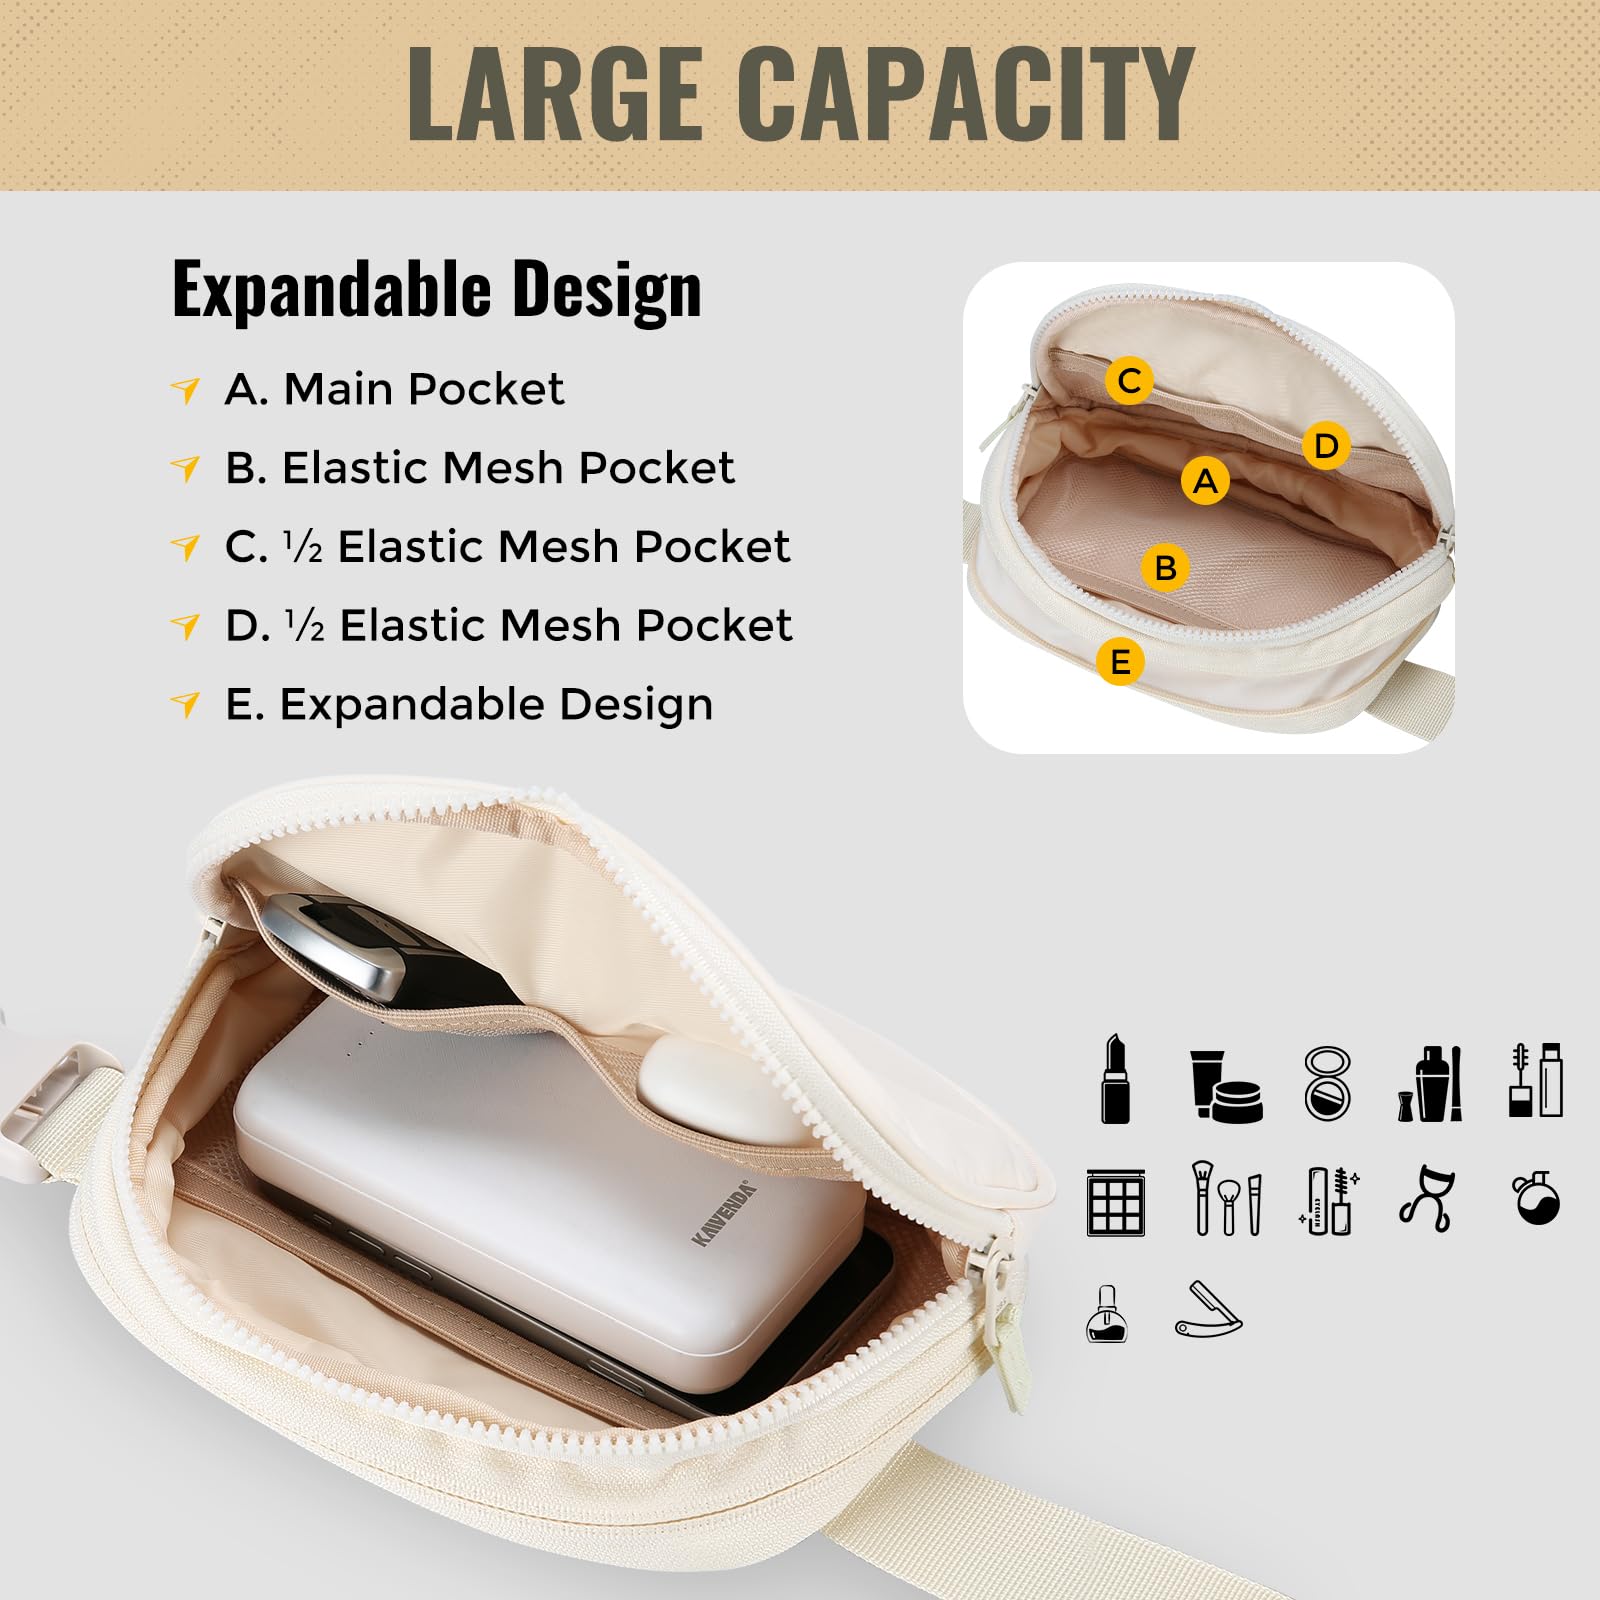 ProCase Upgraded Fanny Pack for Men Women, Fashion Crossbody Belt Bag Waterproof Running Waist Packs Bum Bag with Adjustable Sturdy Strap and Double Zipper to Enlarge Capacity for Travel -Beige